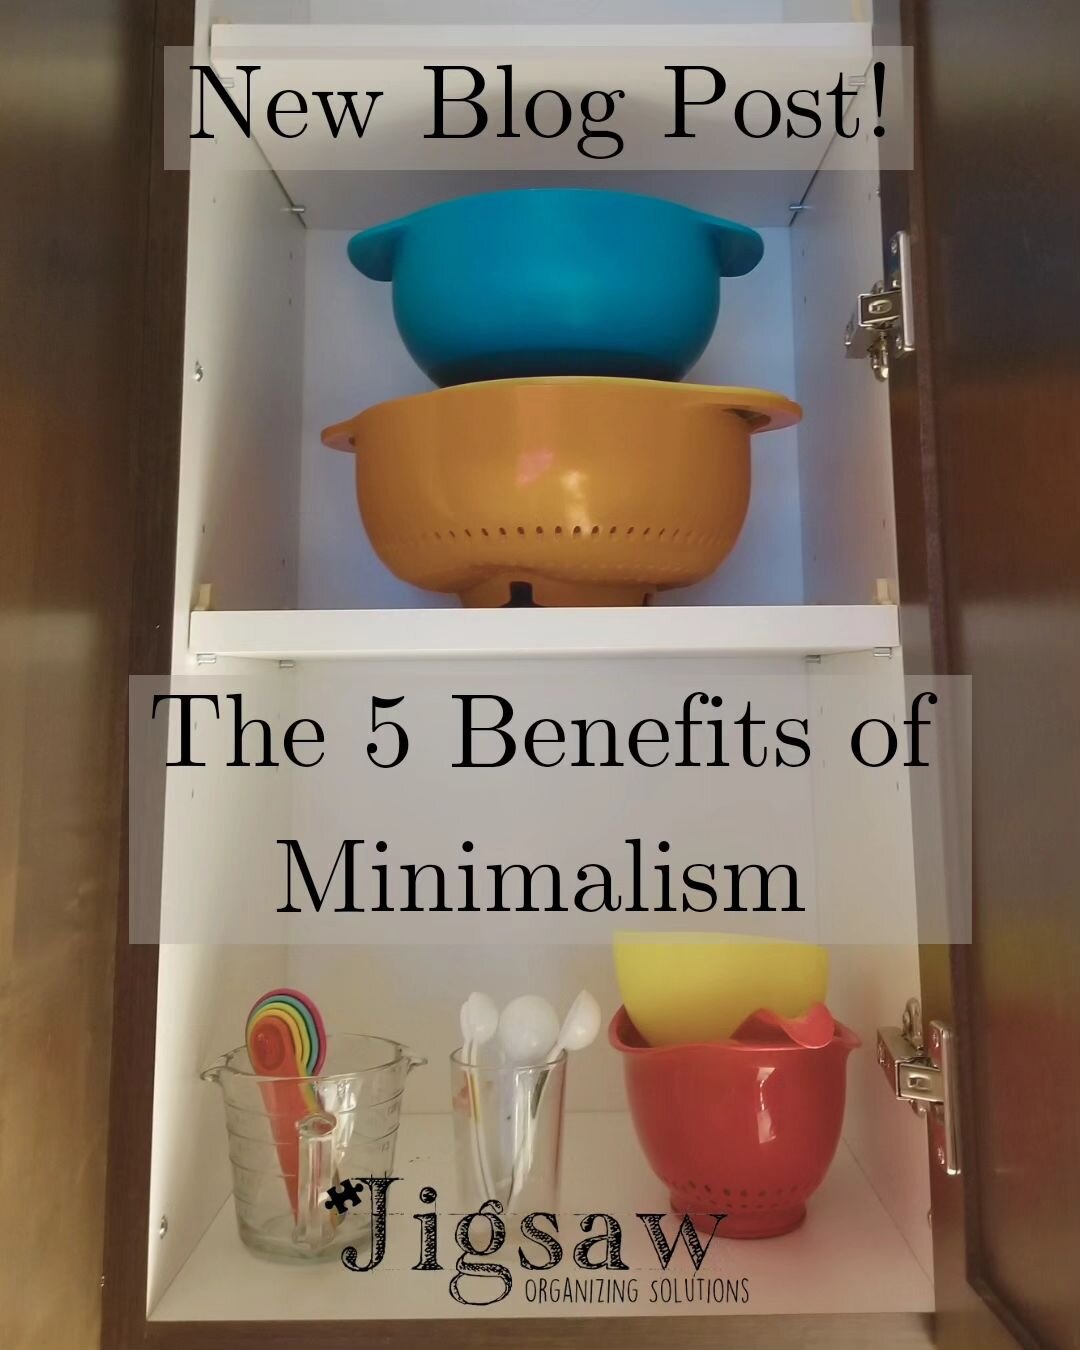 Minimalism is a bit of a buzz word, but can be scary to some! A lot of people picture an asylum-like space with very few possessions, where everything is white or grey.

That may be some people's goals and aesthetics, but it doesn't have to be that w